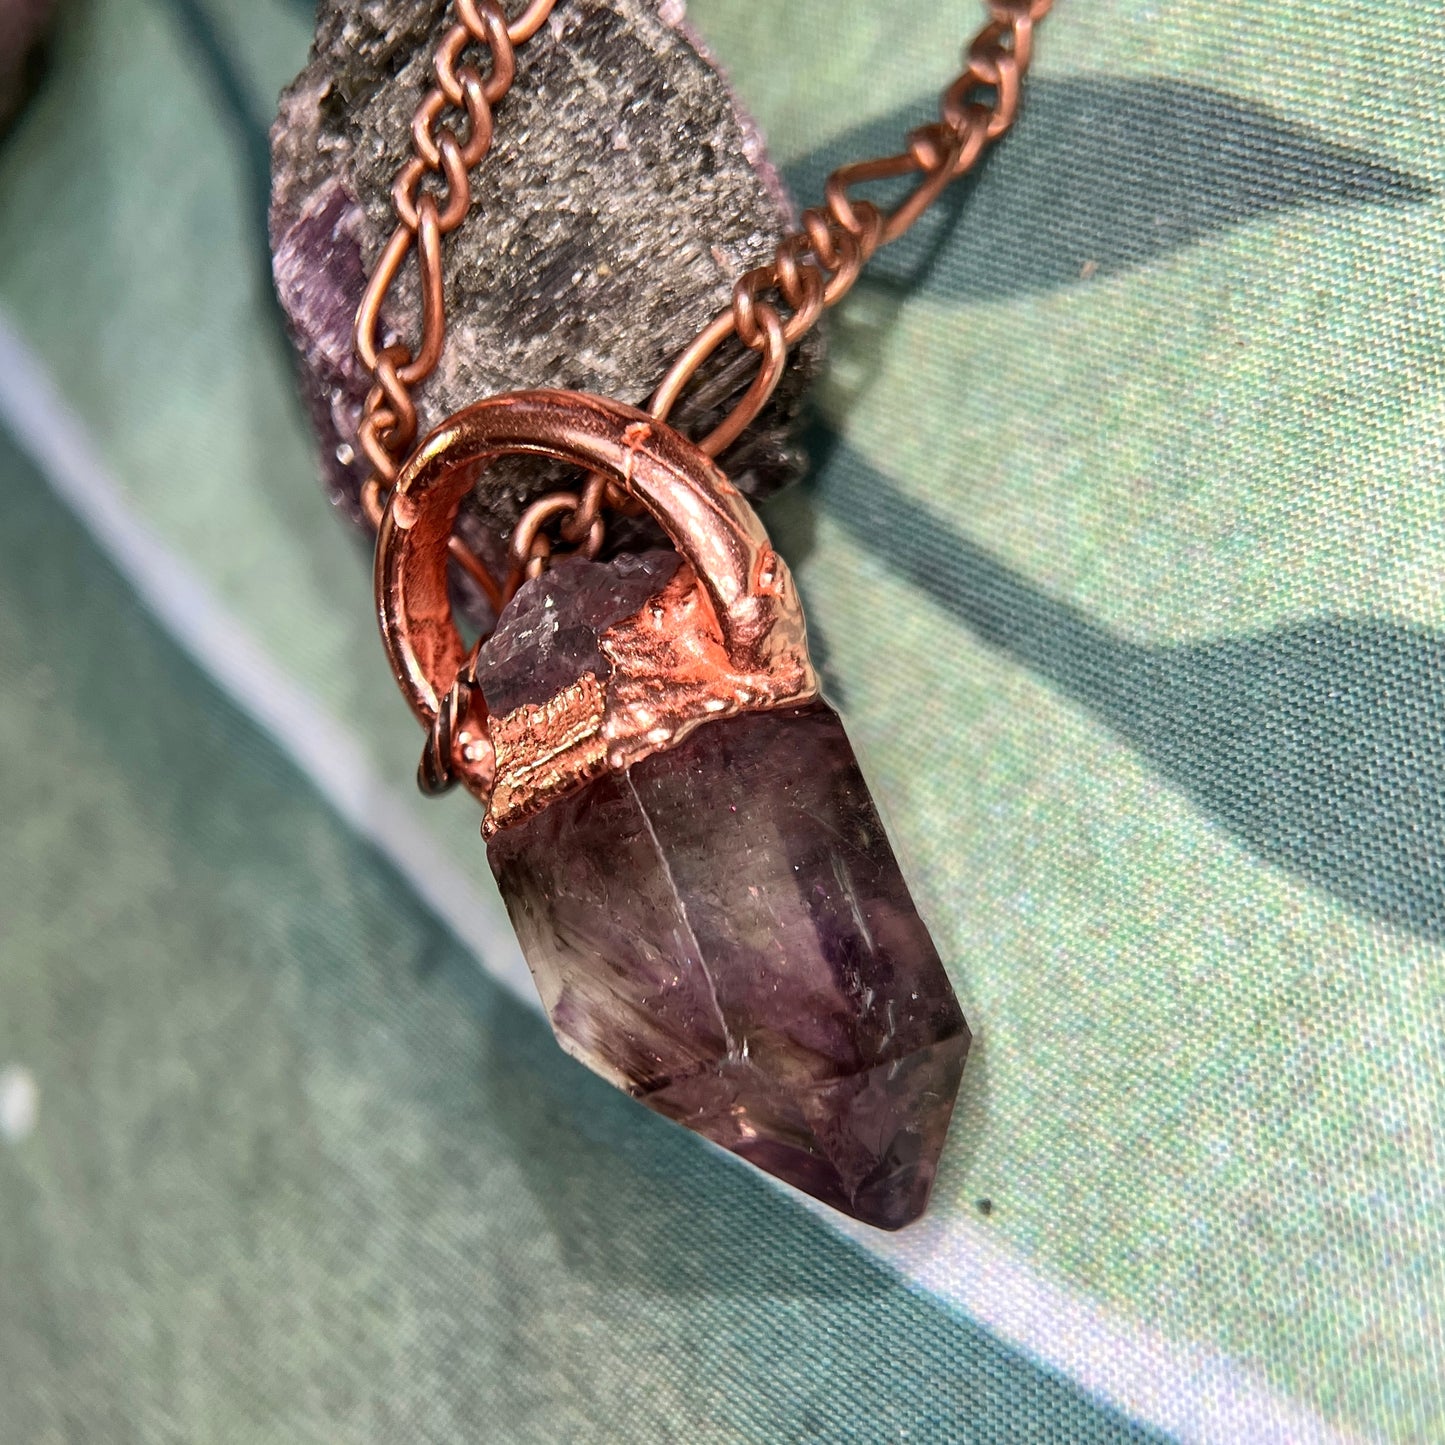 Smoky Amethyst Point Crystal Necklace